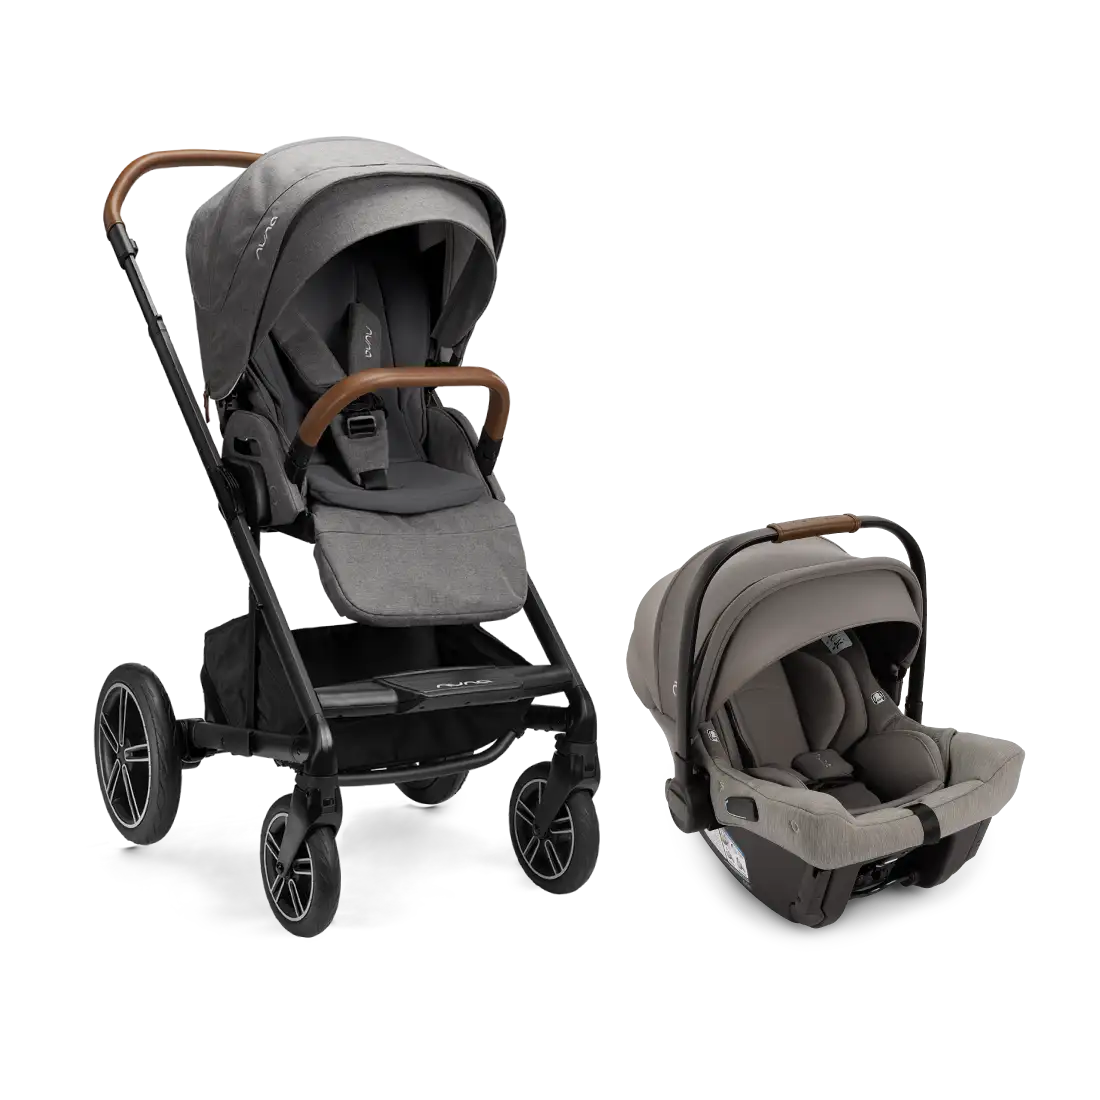 Pipa Urbn Travel System with MIXX Next Stroller - Granite